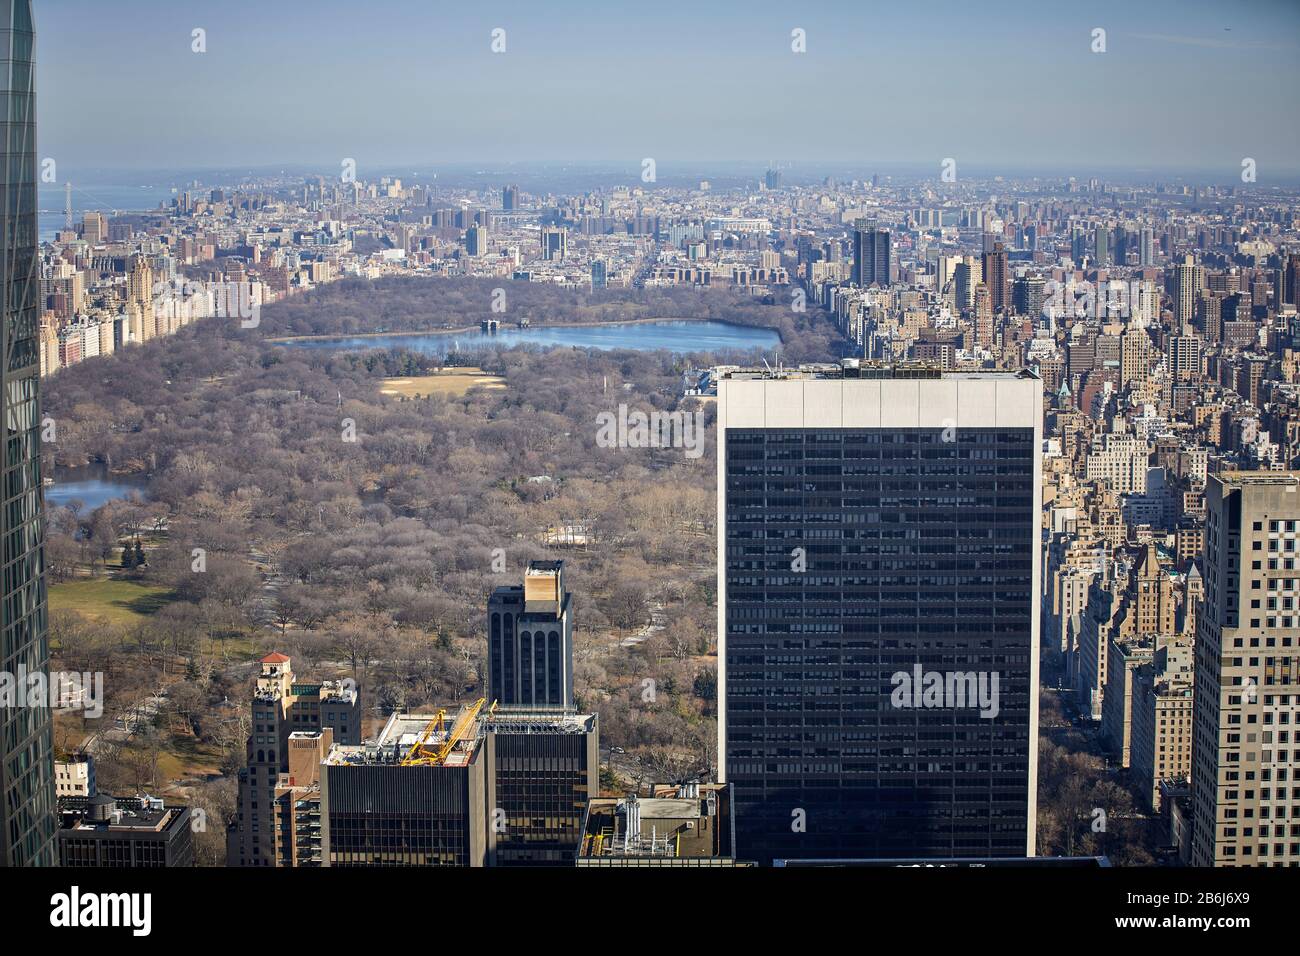 New York city Manhattan skyline Central Park with building lining the perimeter Stock Photo